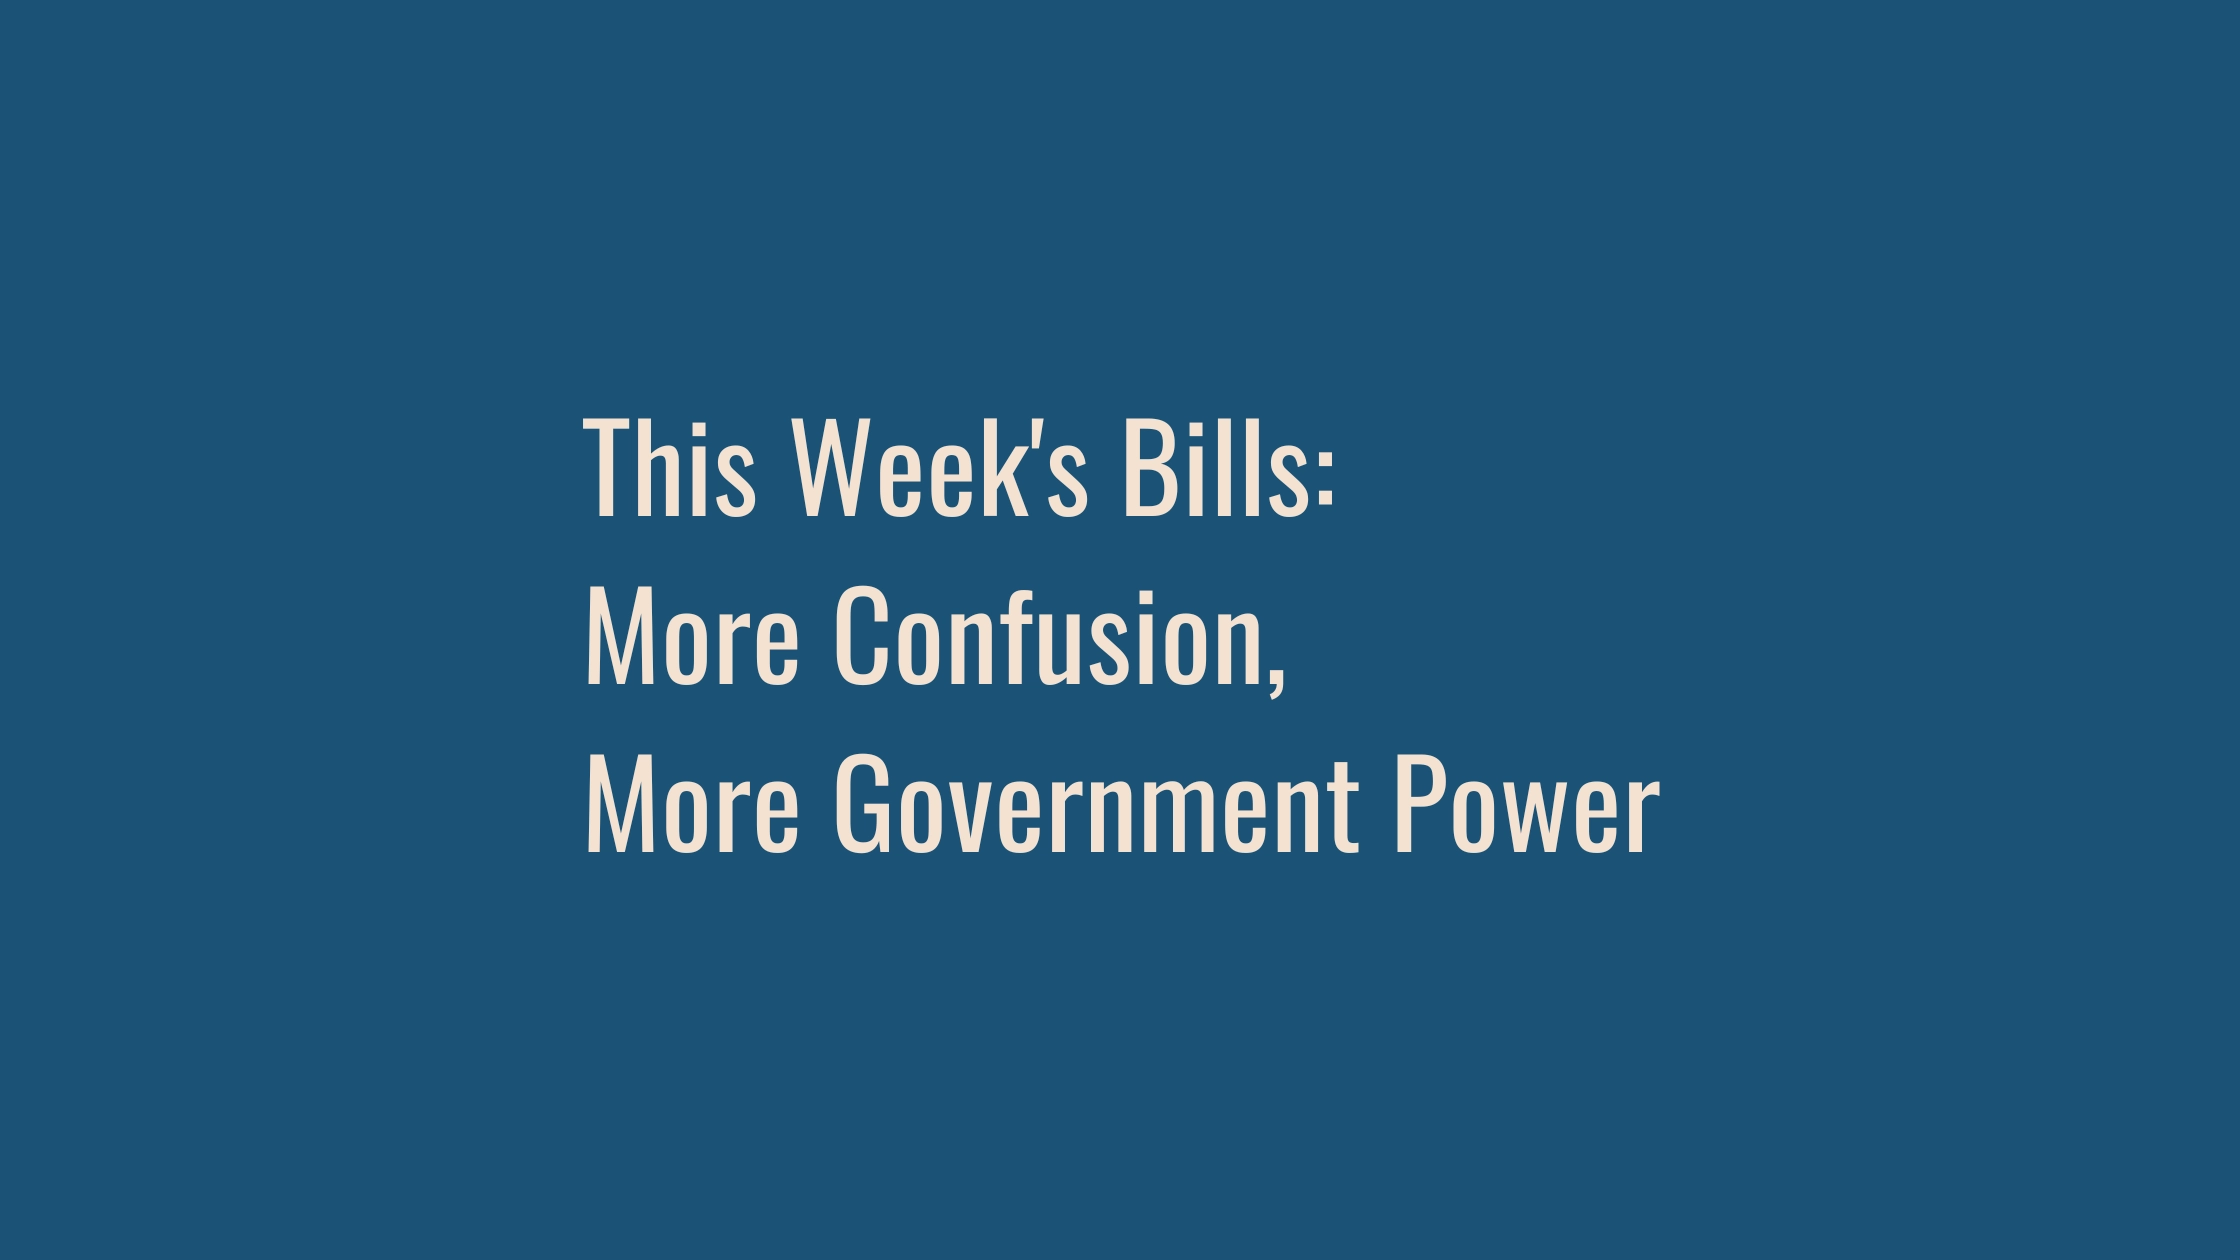 This Week's Bills: More Confusion, More Government Power